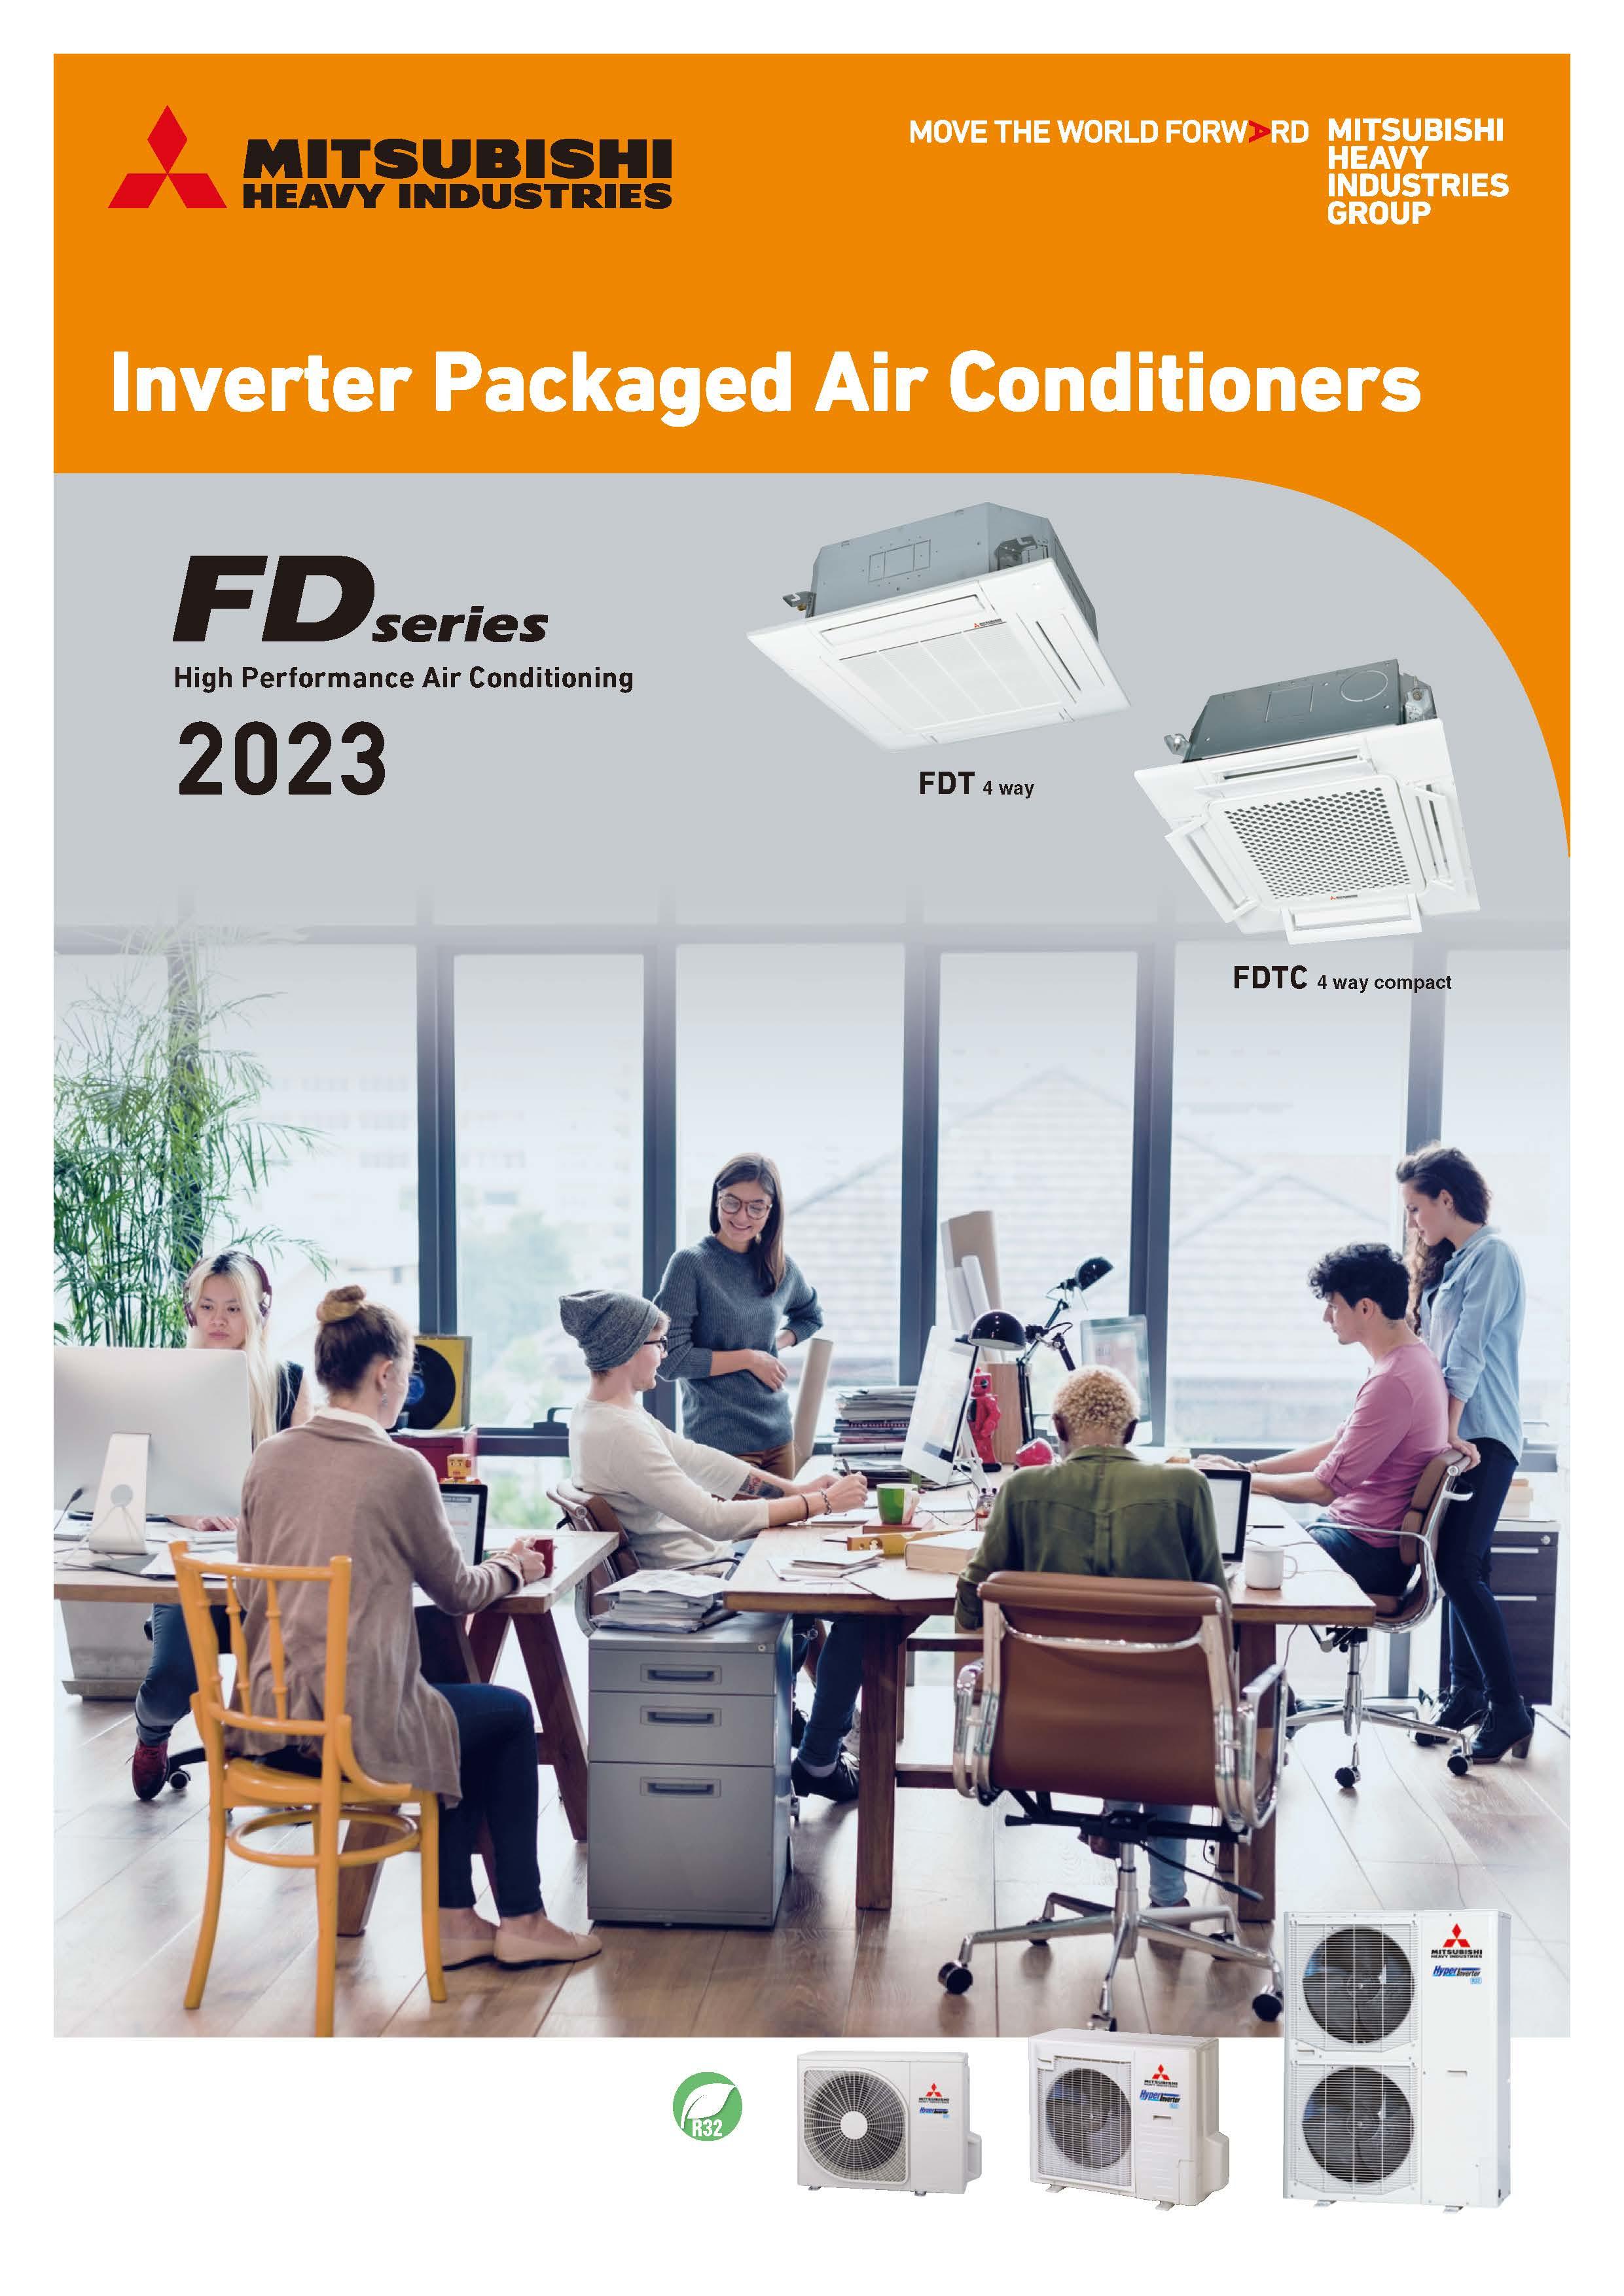 FD Series High Performance Air-Conditioners 2023